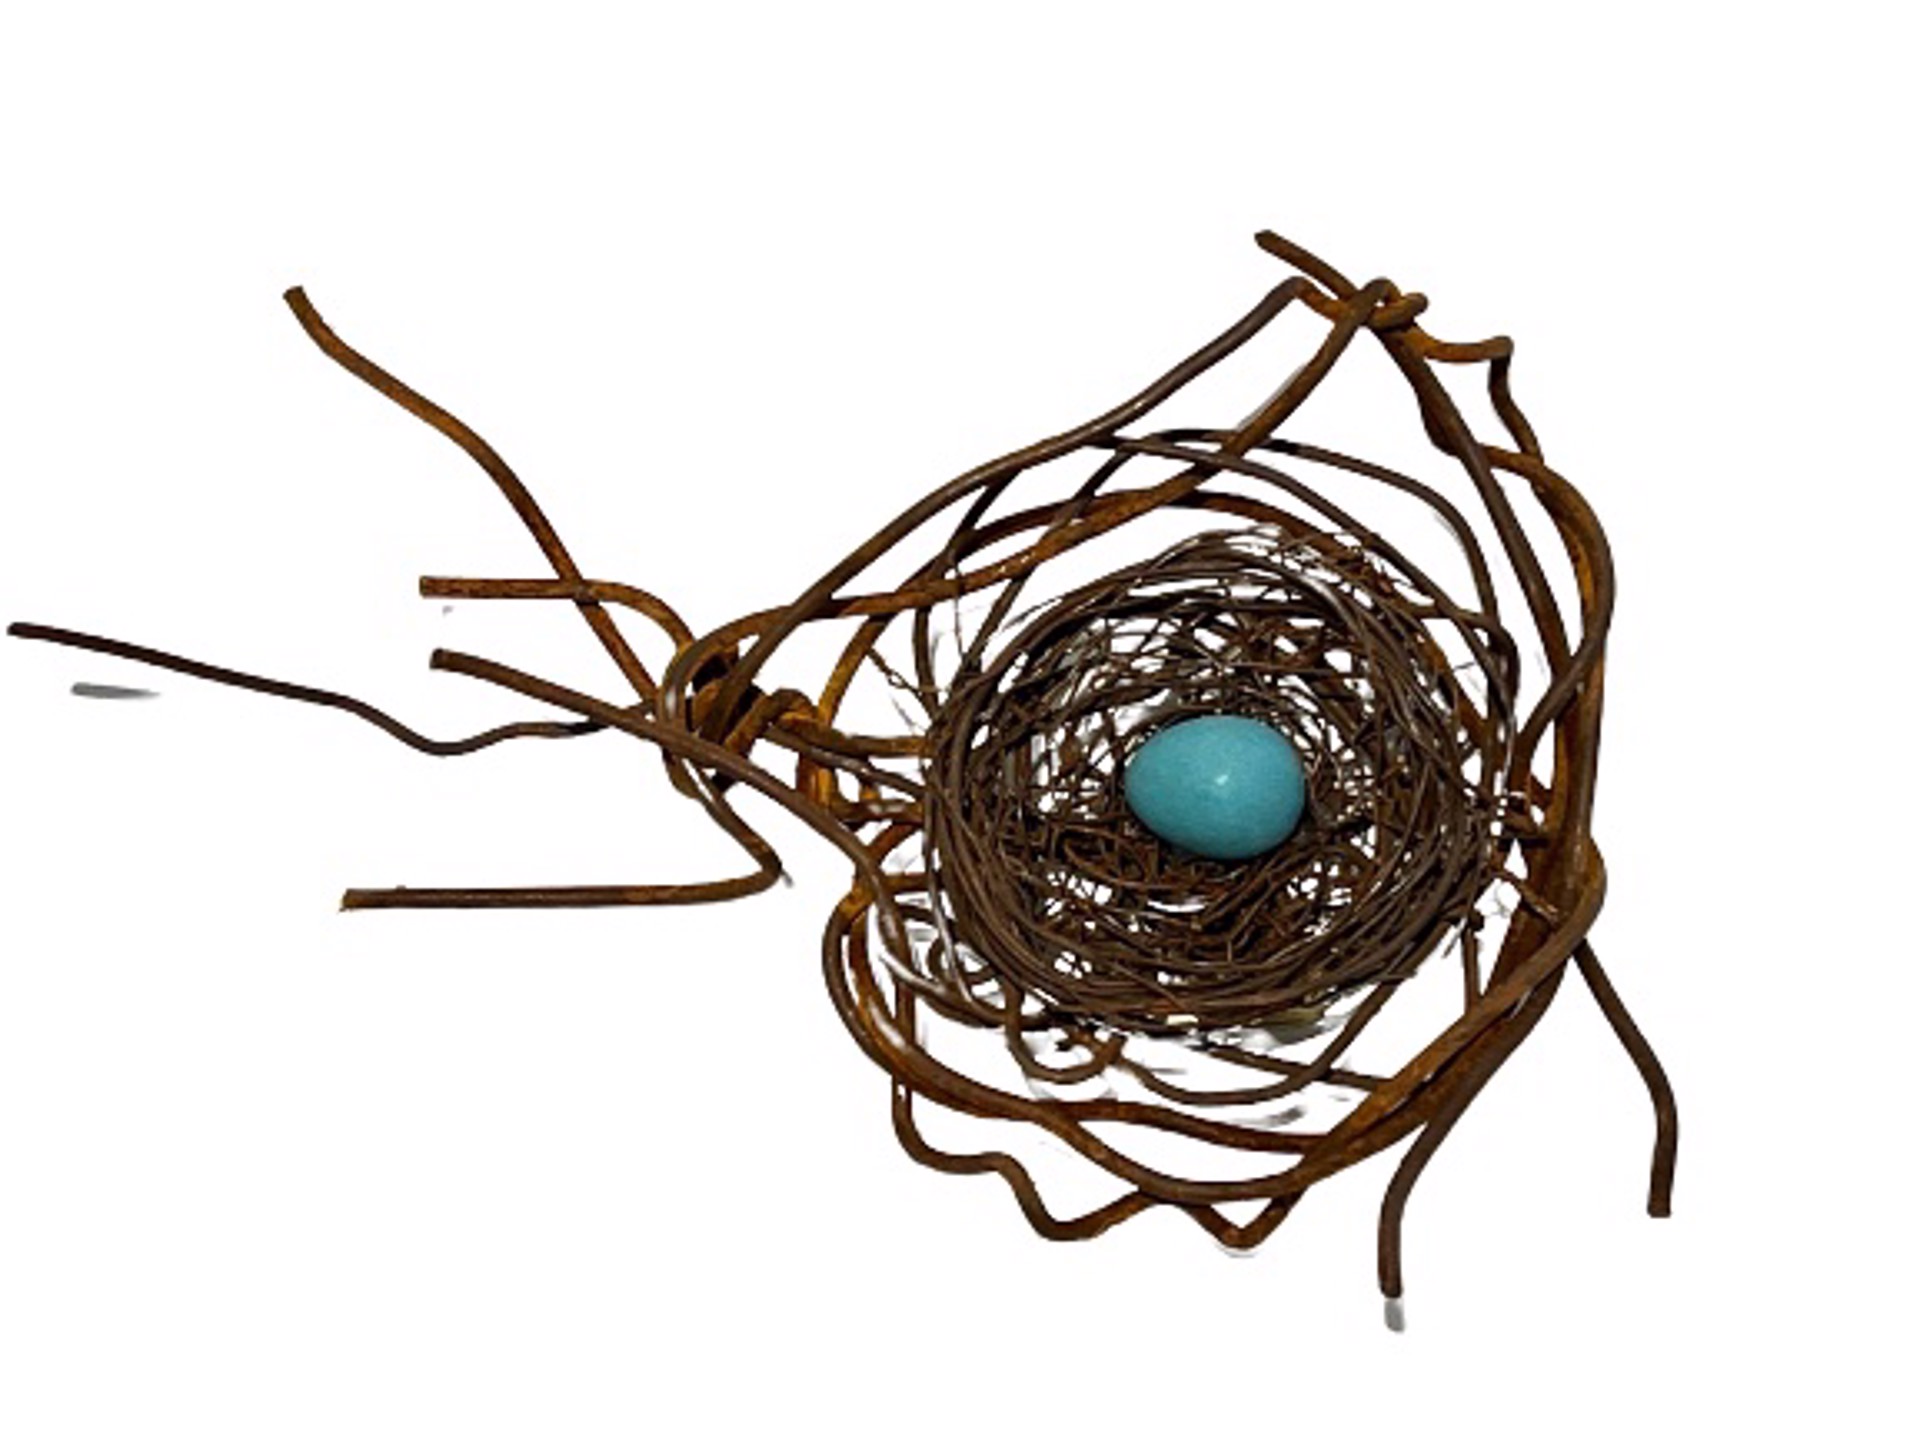 Hand Woven Wire Nest w/1 Turquoise Egg #1365 by Phil Lichtenhan